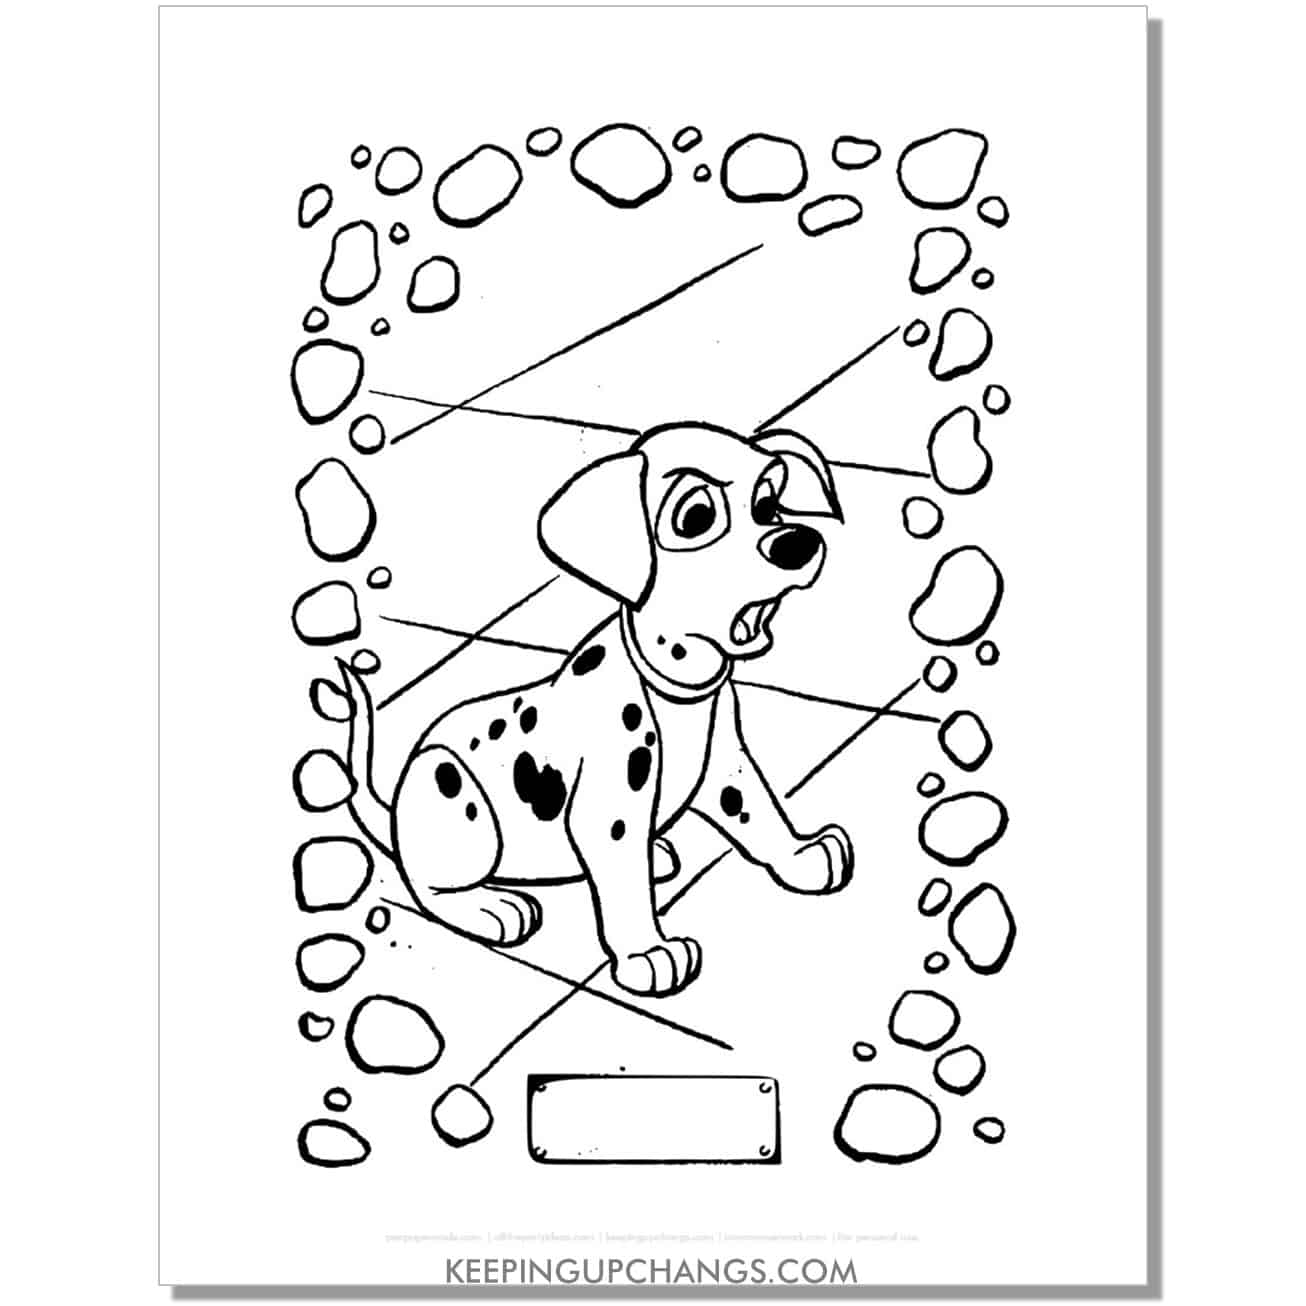 free rolly barking 101 dalmations coloring page, sheet.